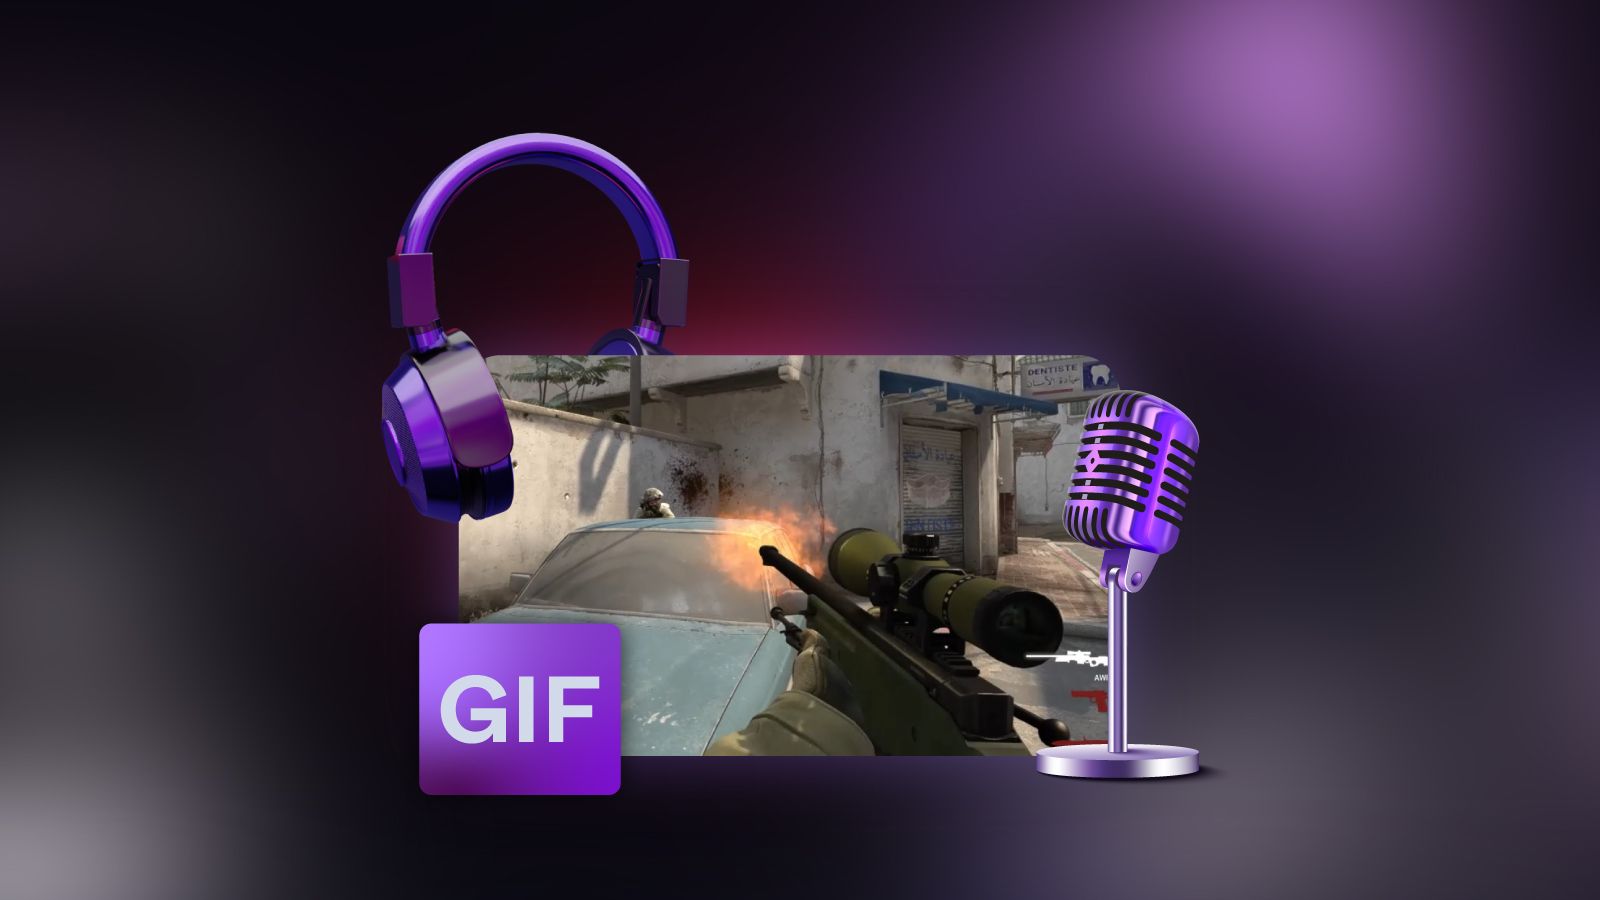 ZBD Streamer features an interactive overlay with triggerable GIFs, soundbites and more.